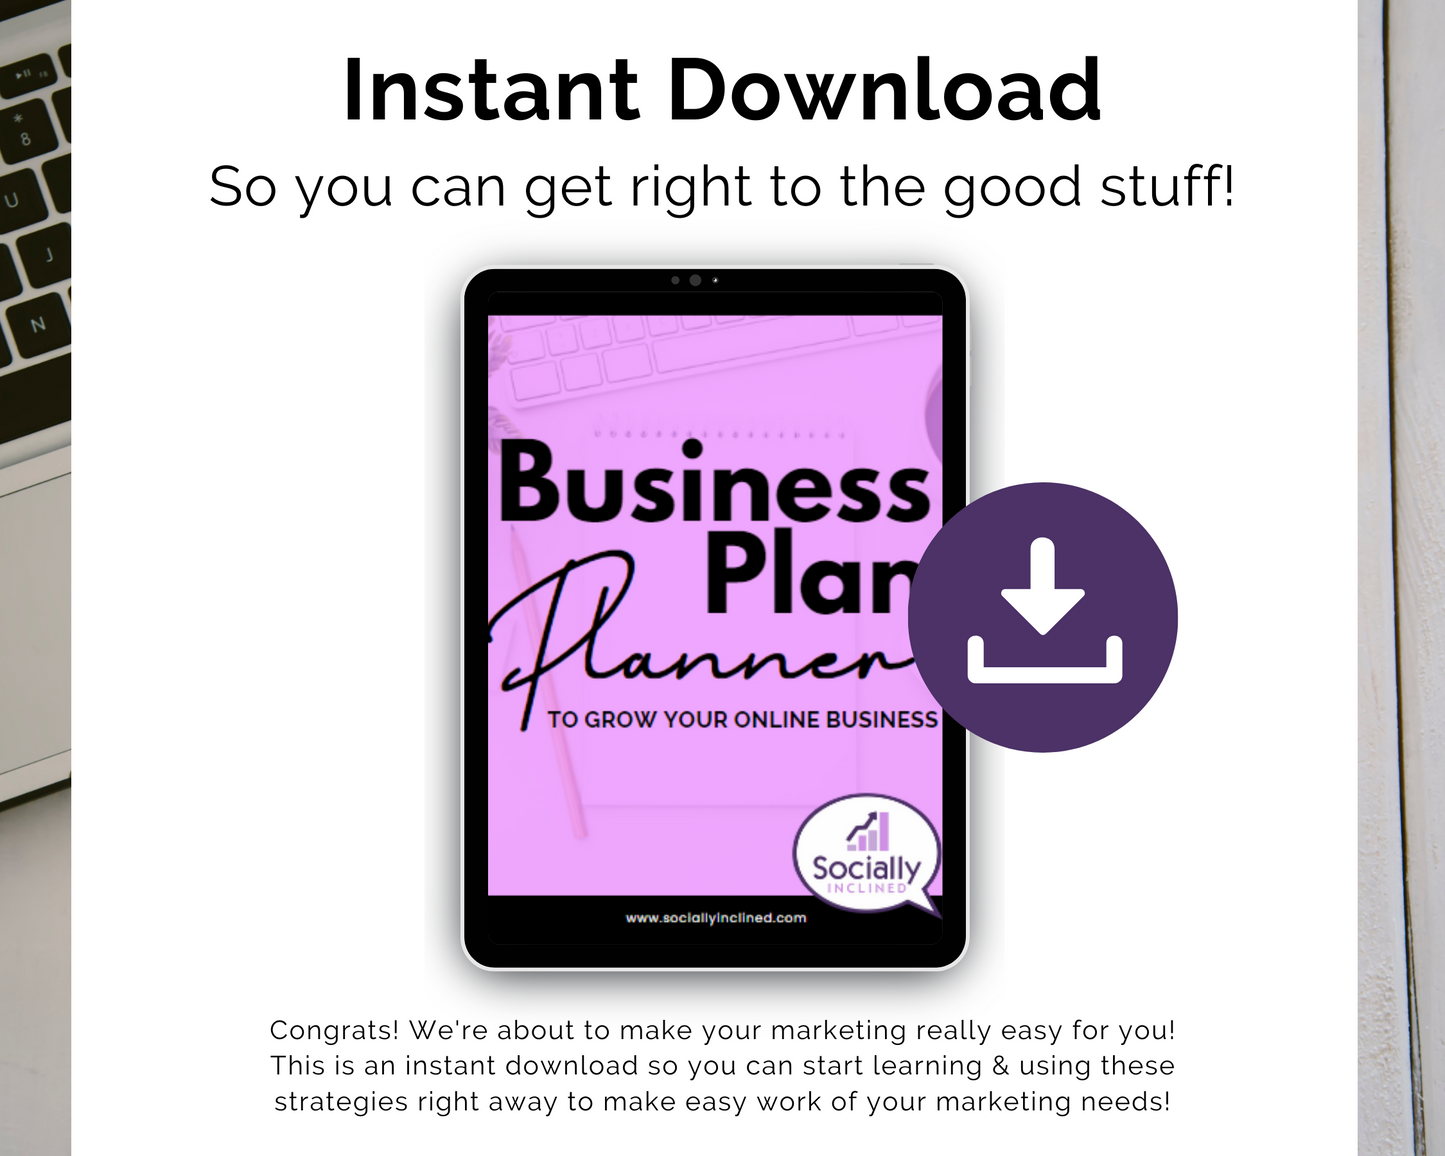 Instant download Business Plan Planner template from Get Socially Inclined.